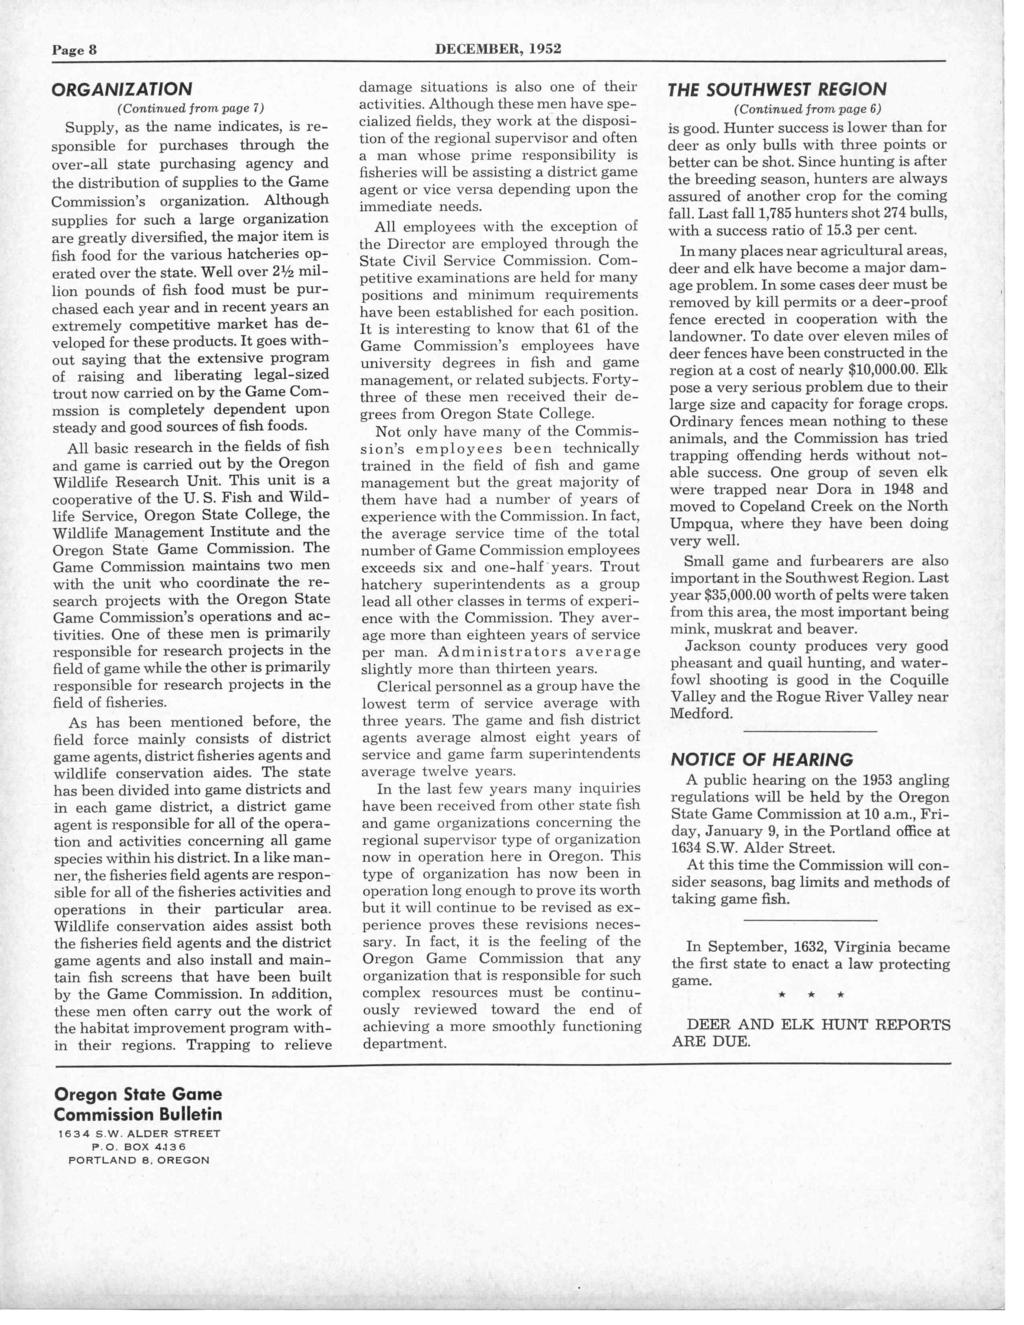 Page 8 DECEMBER, 1952 ORGANIZATION (Continued from page 7) Supply, as the name indicates, is responsible for purchases through the over-all state purchasing agency and the distribution of supplies to